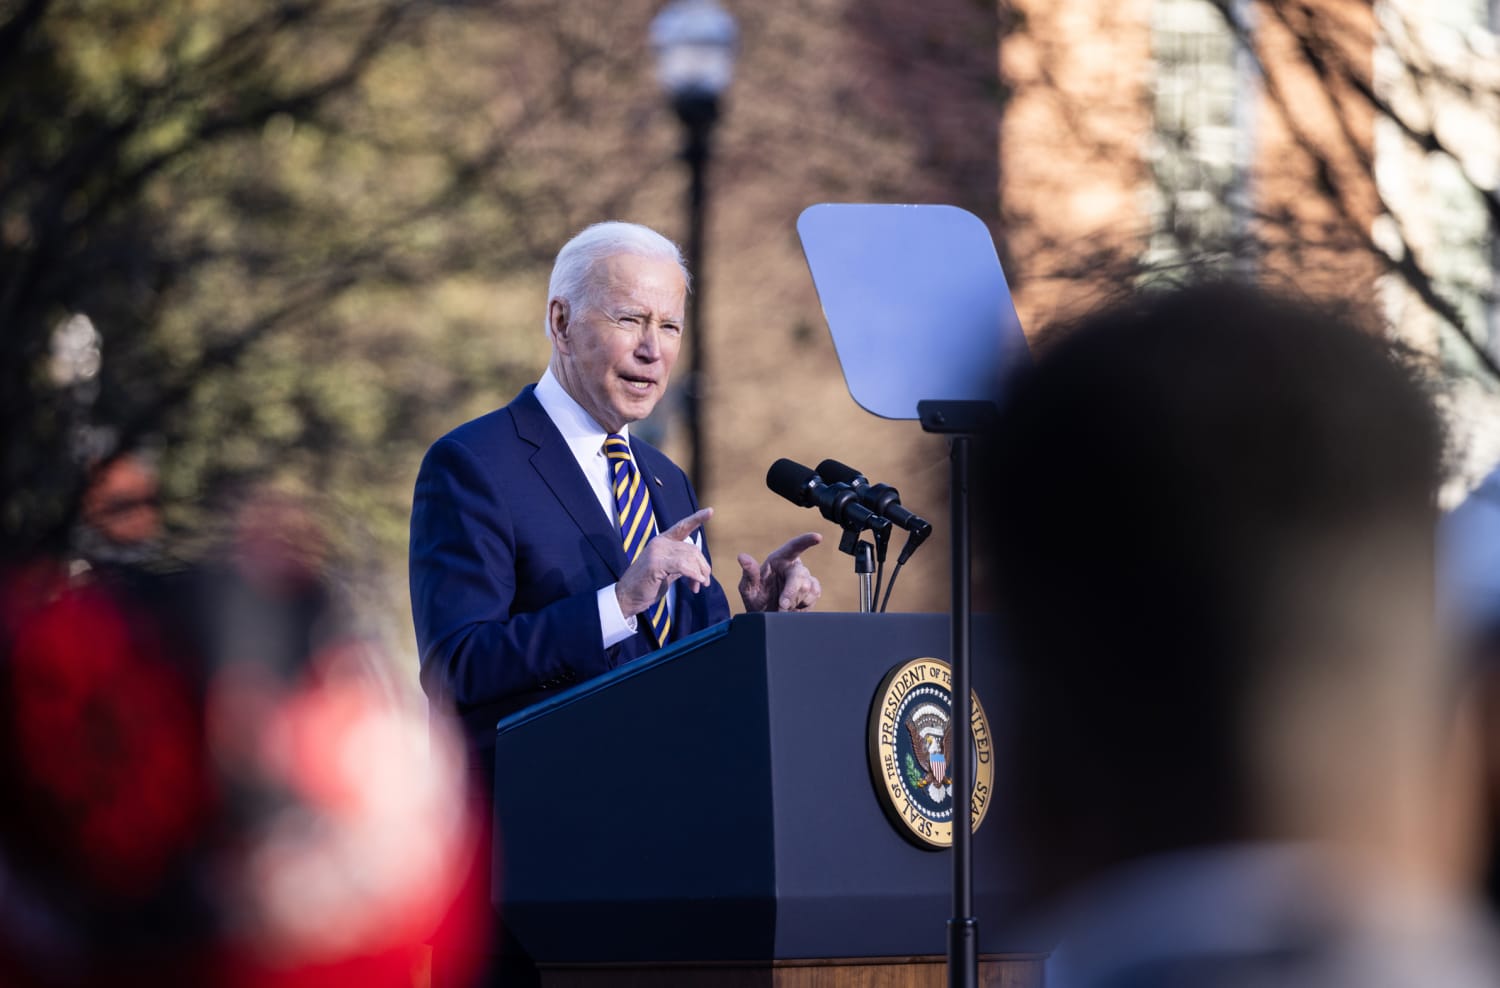 Biden voices uncertainty about passing voting rights bills after meeting with Democrats